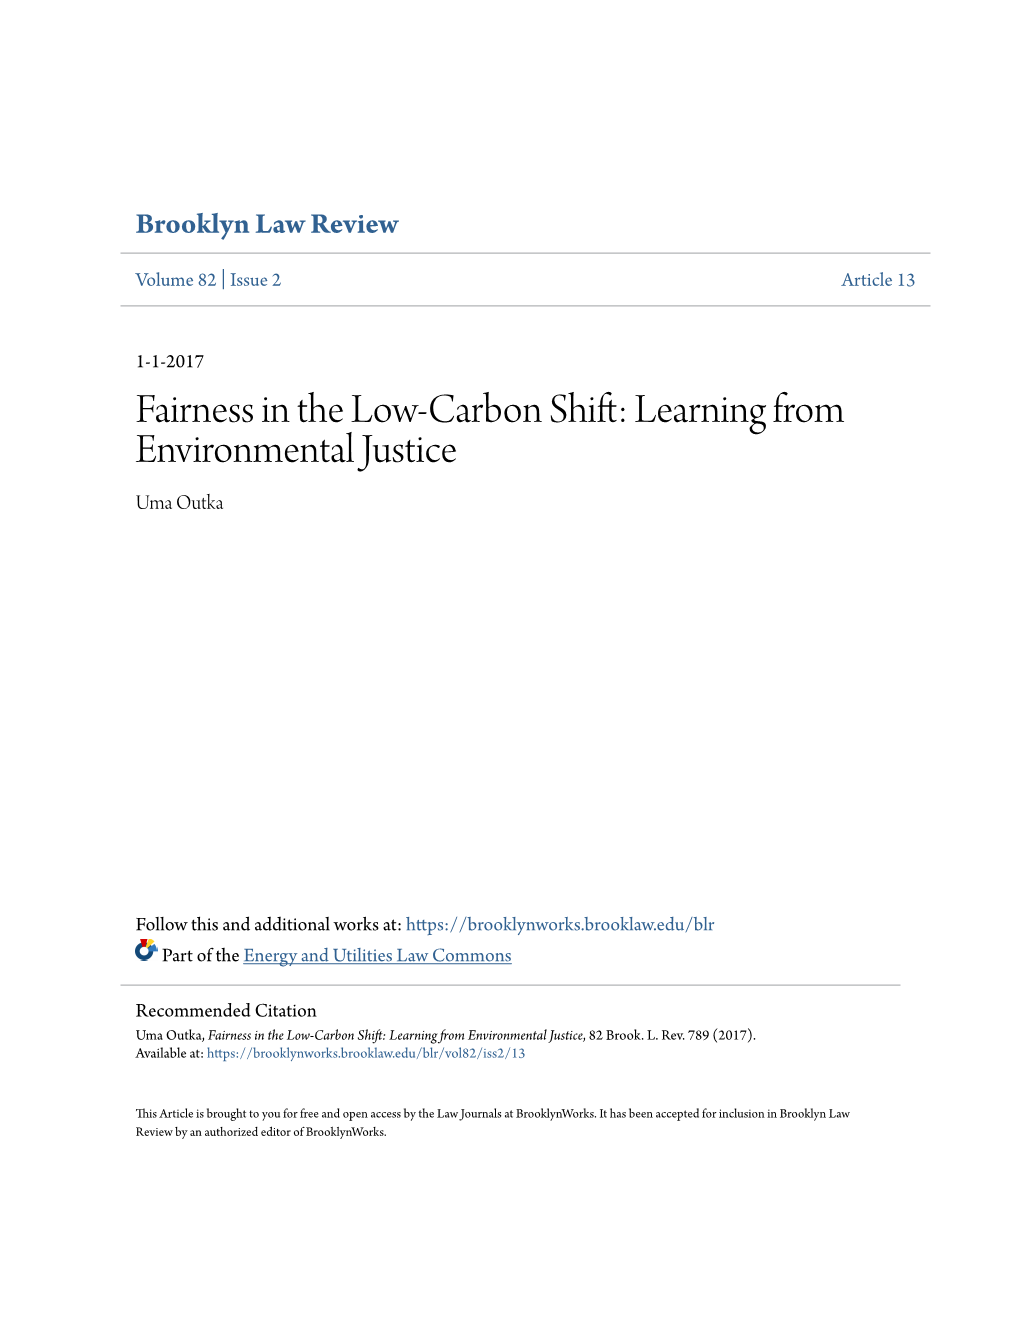 Fairness in the Low-Carbon Shift: Learning from Environmental Justice Uma Outka